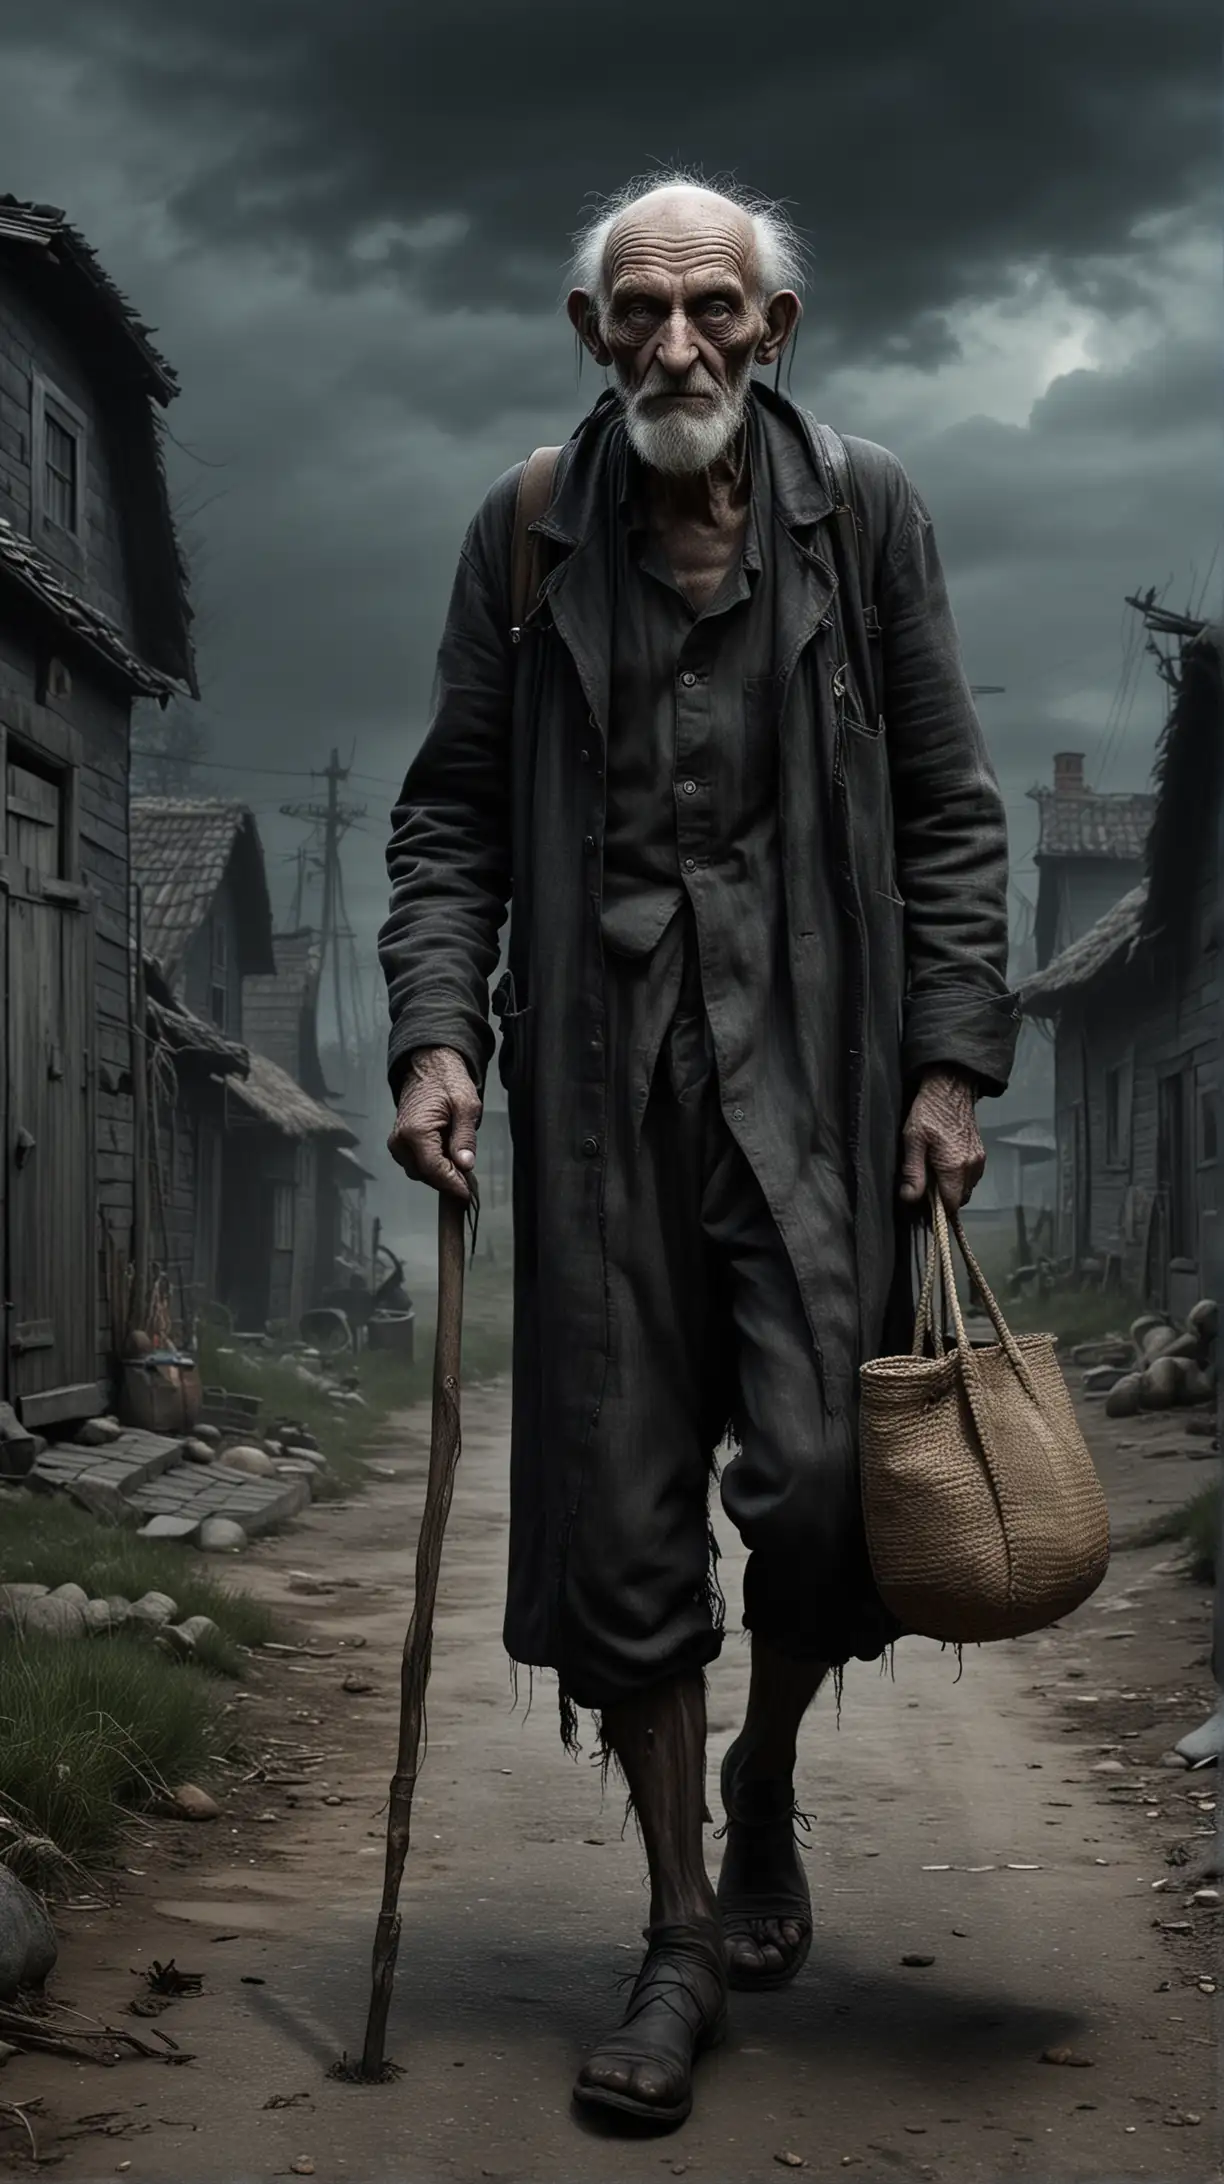 male old ugly with one eye Babay in dark horror style, pitch-black, old, crooked man who carries around a bag and cane, man with physical defects, dark scary village houses on background, hyper-realistic, photo-realistic